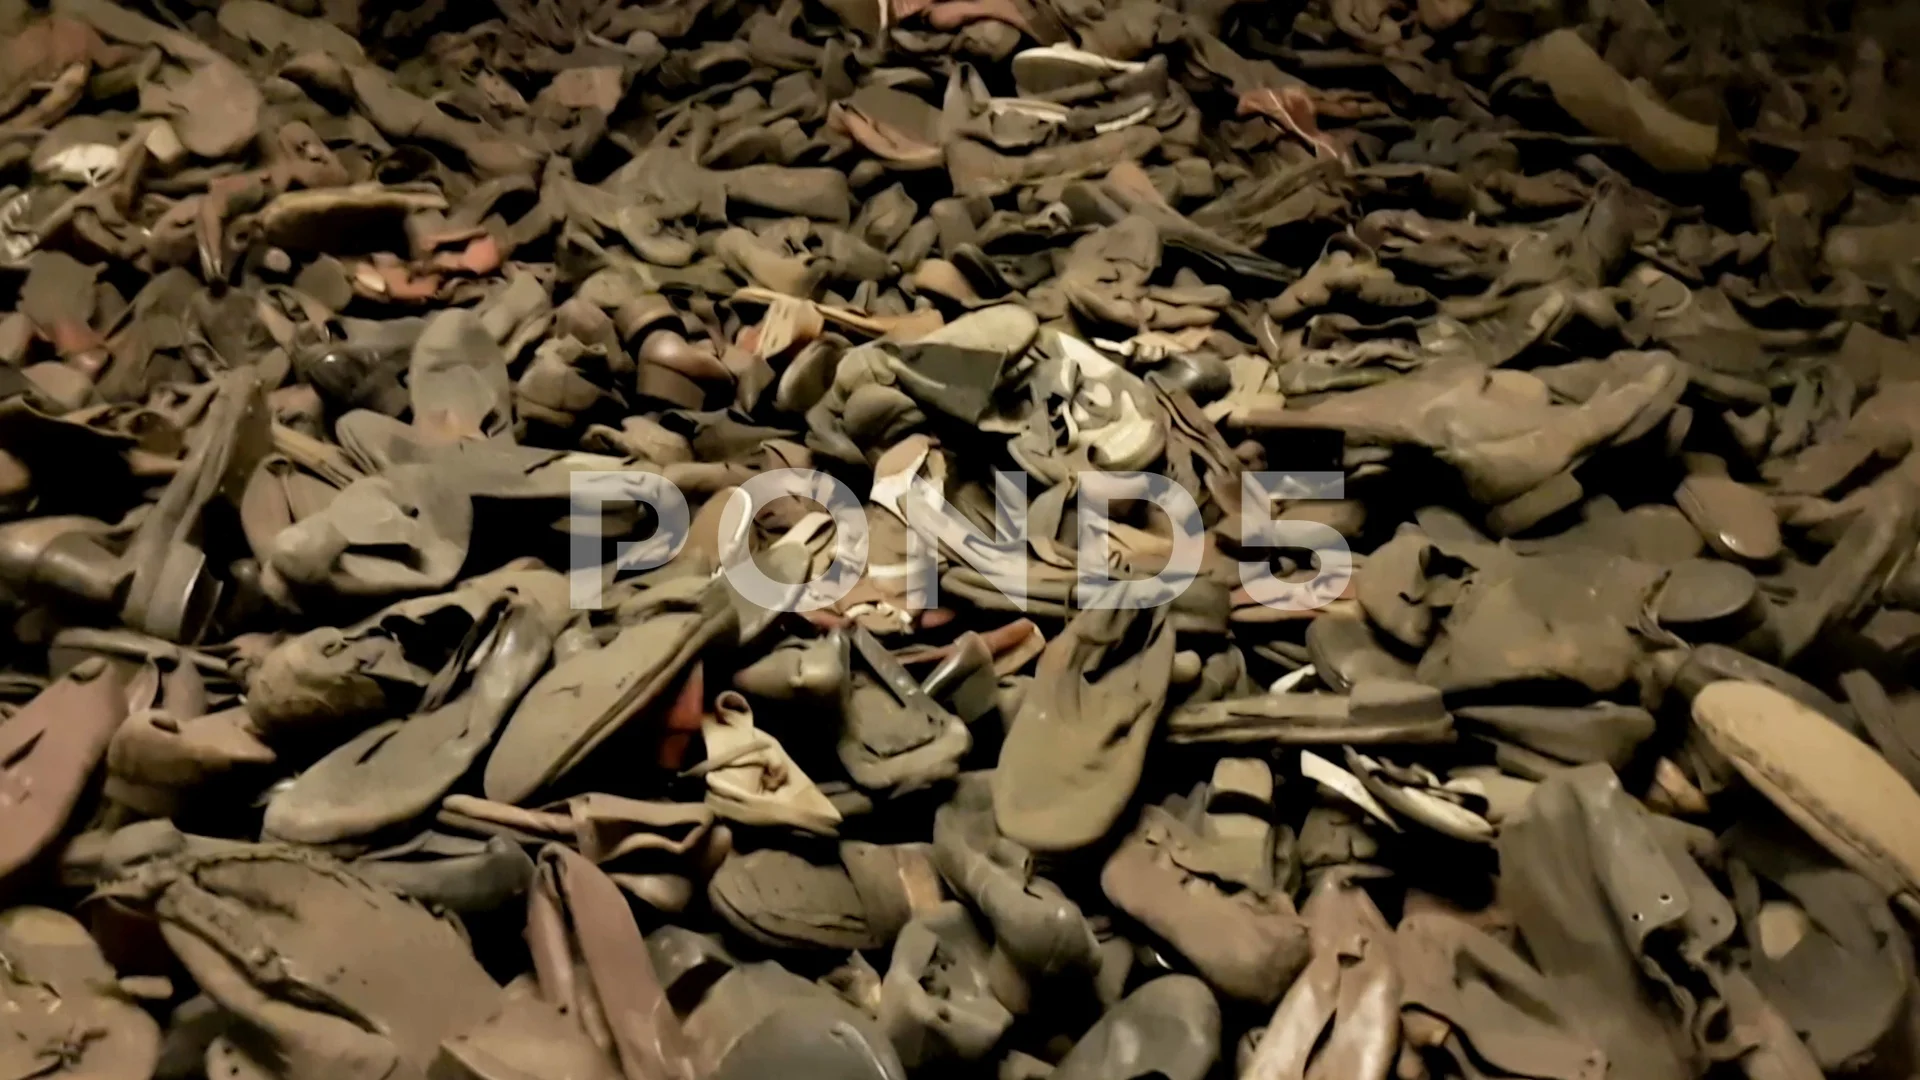 The Remaining Shoes Of Victims Of Holocaust In Auschwitz